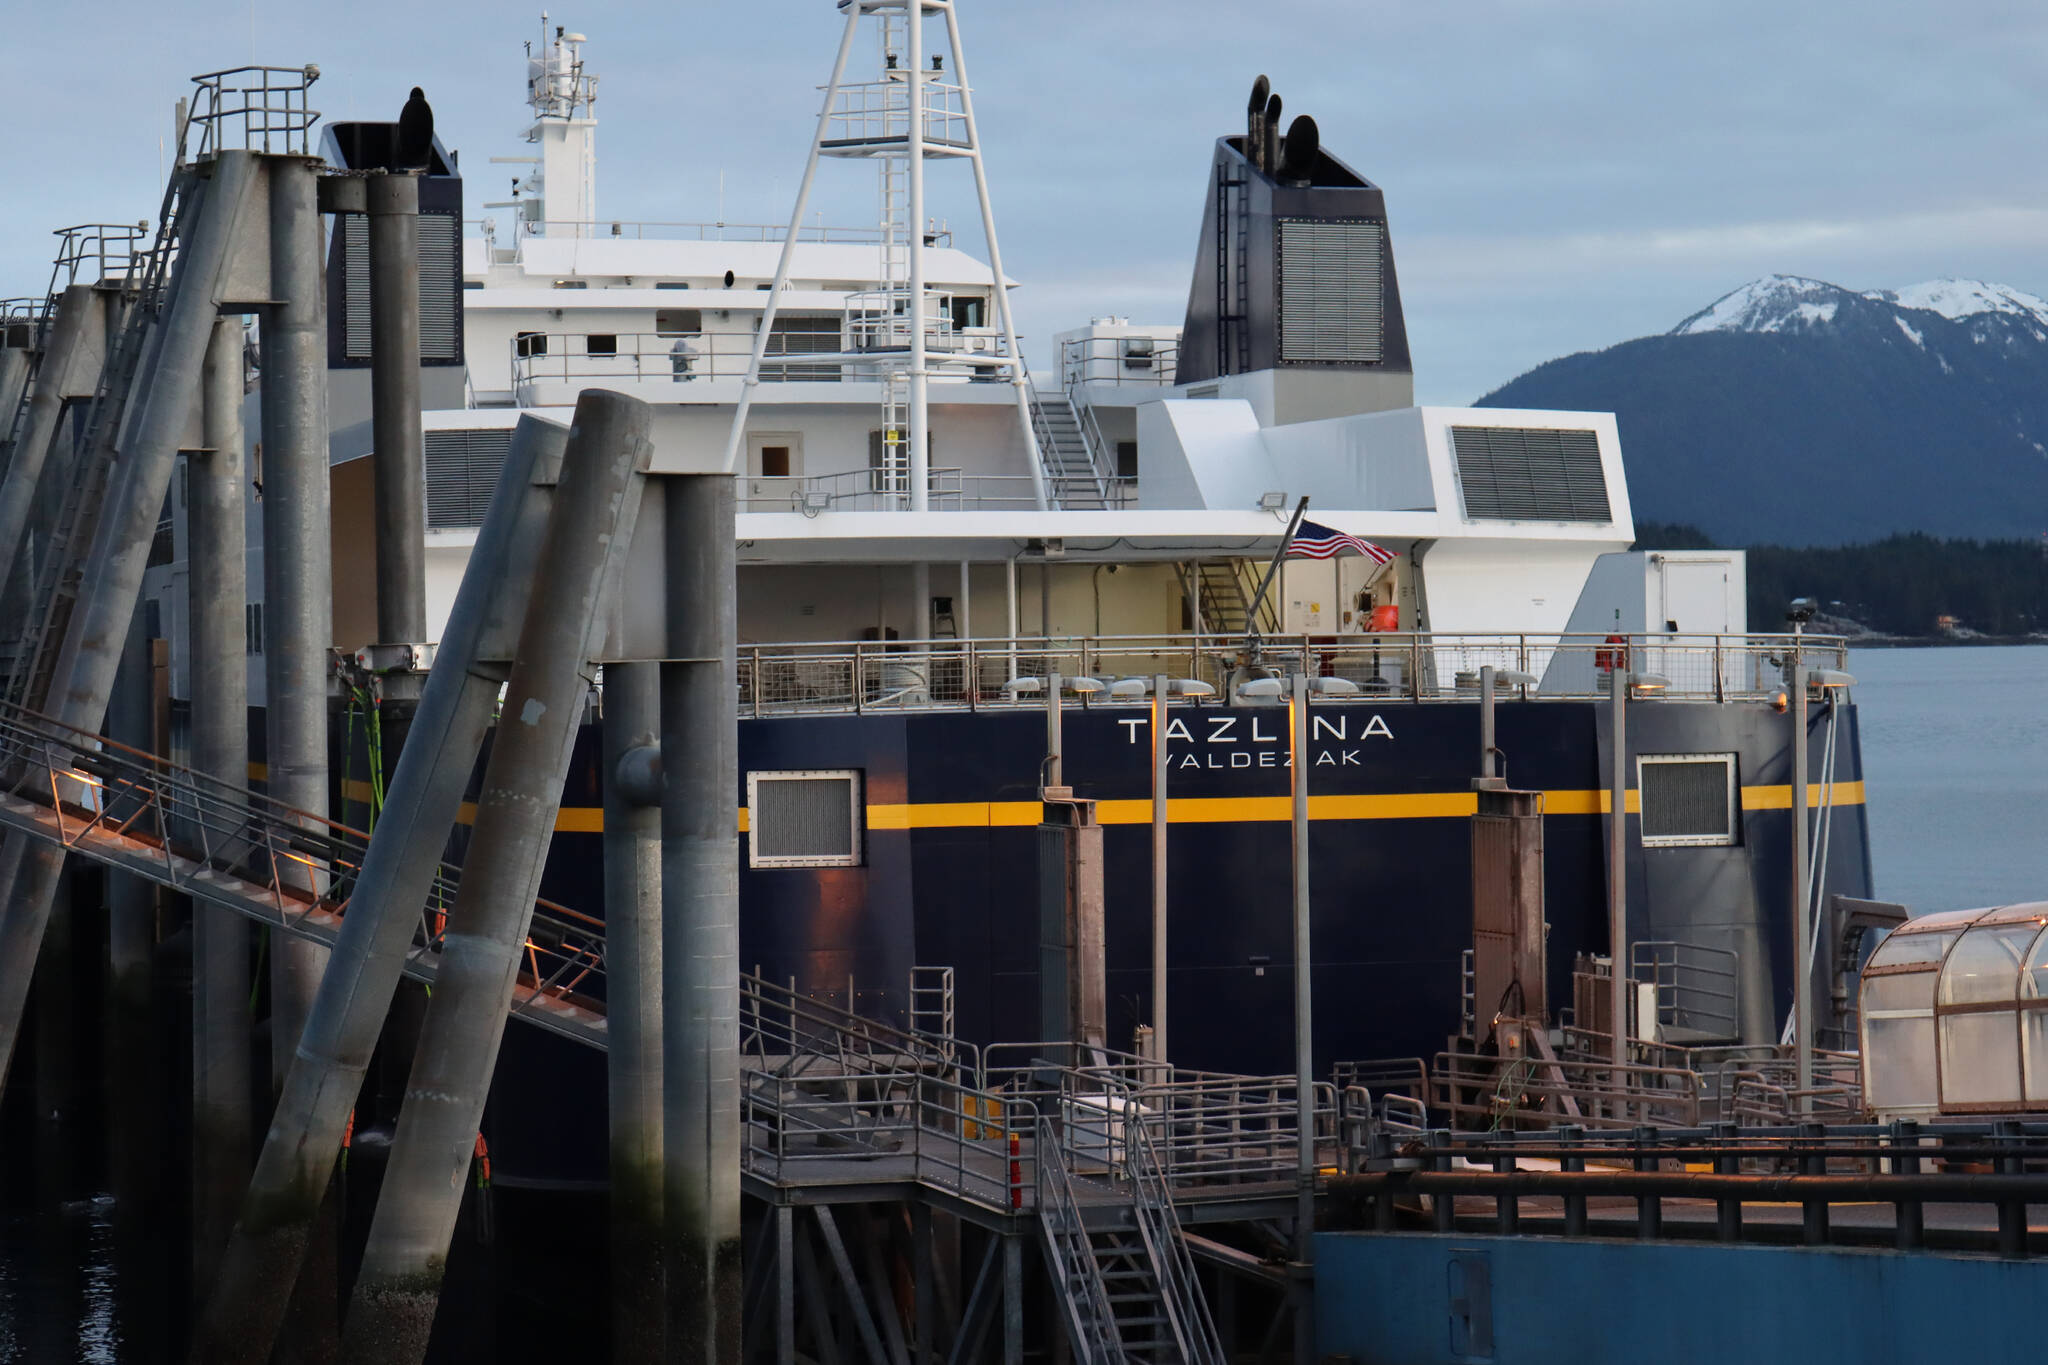 The Tazlina was docked at the Auke Bay ferry terminal on Monday, Nov. 15, 2021. It is one of 10 vessels in the Alaska Marine Highway fleet. Alaska’s Congressional delegation has said a recently passed infrastructure bill will bring money to the state’s ferries, but until then some communities are still seeing gaps in service over the winter. (Ben Hohenstatt / Juneau Empire)